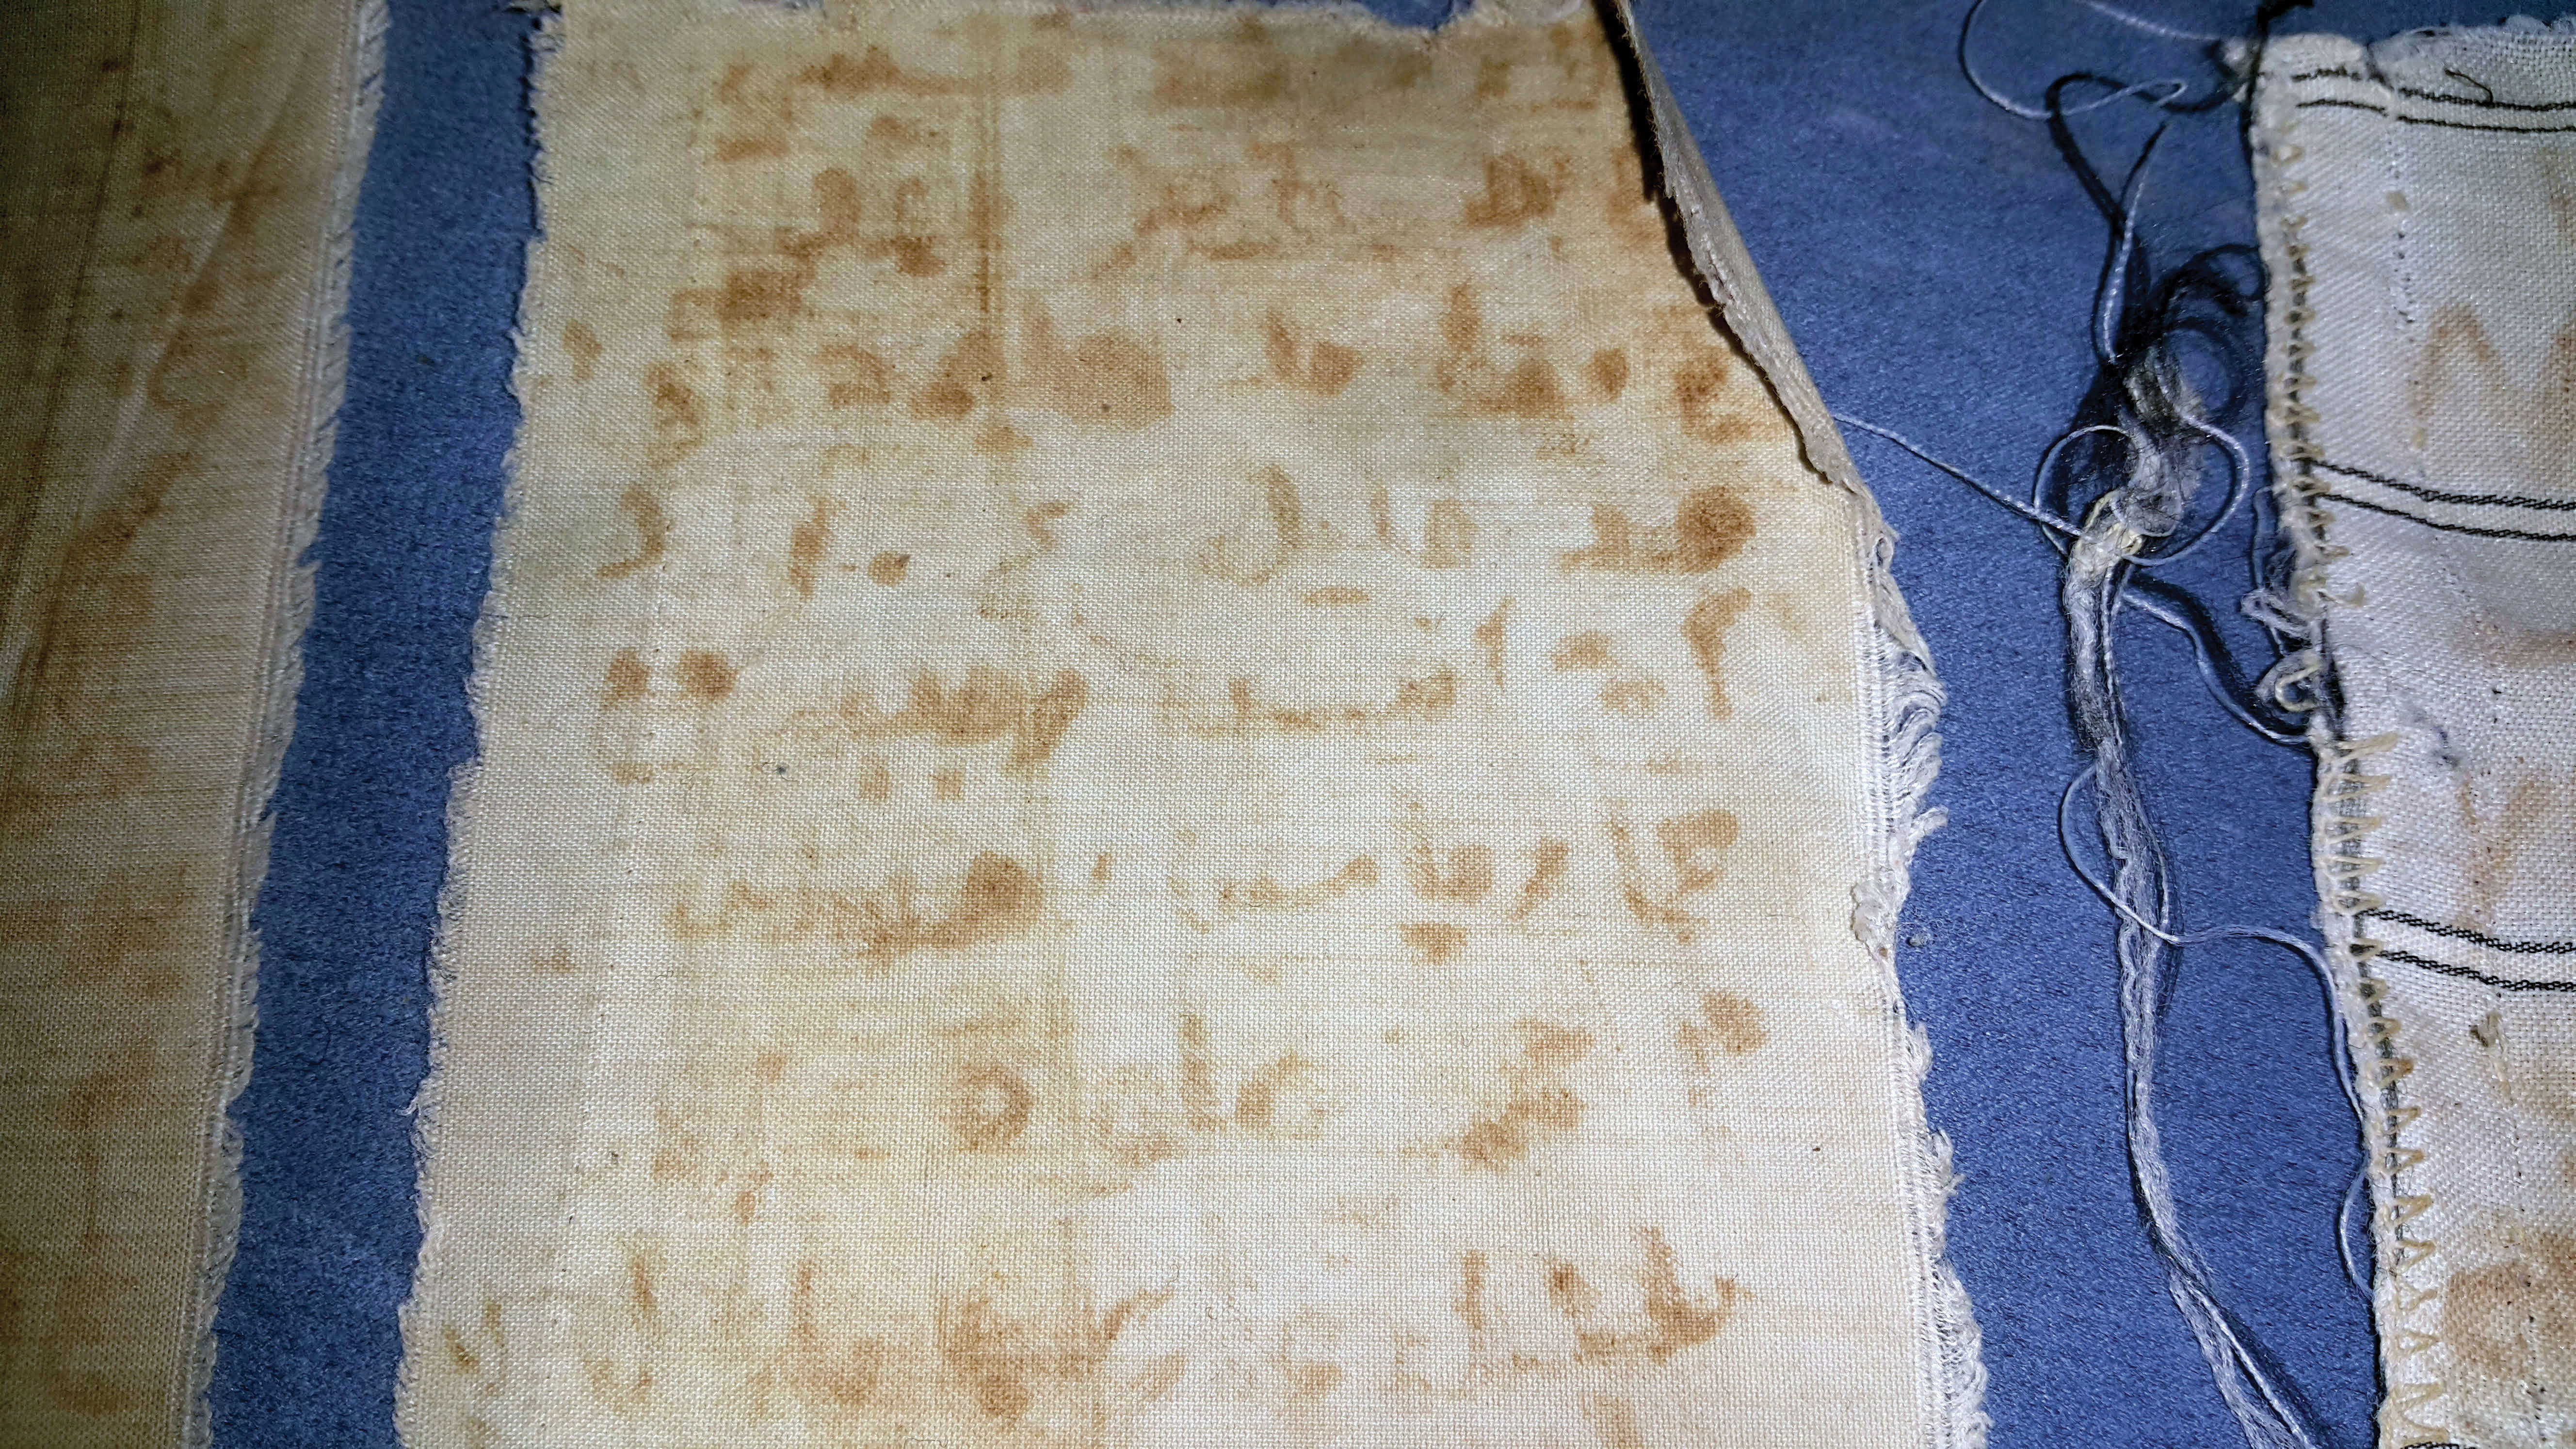 A detainee’s shirt, on which Nabil Sharbaji wrote the names of his cellmates in blood and rust, and which the journalist Mansour al-Omari took with him when he was released (Enab Baladi Exclusive, Mansour al-Omari)